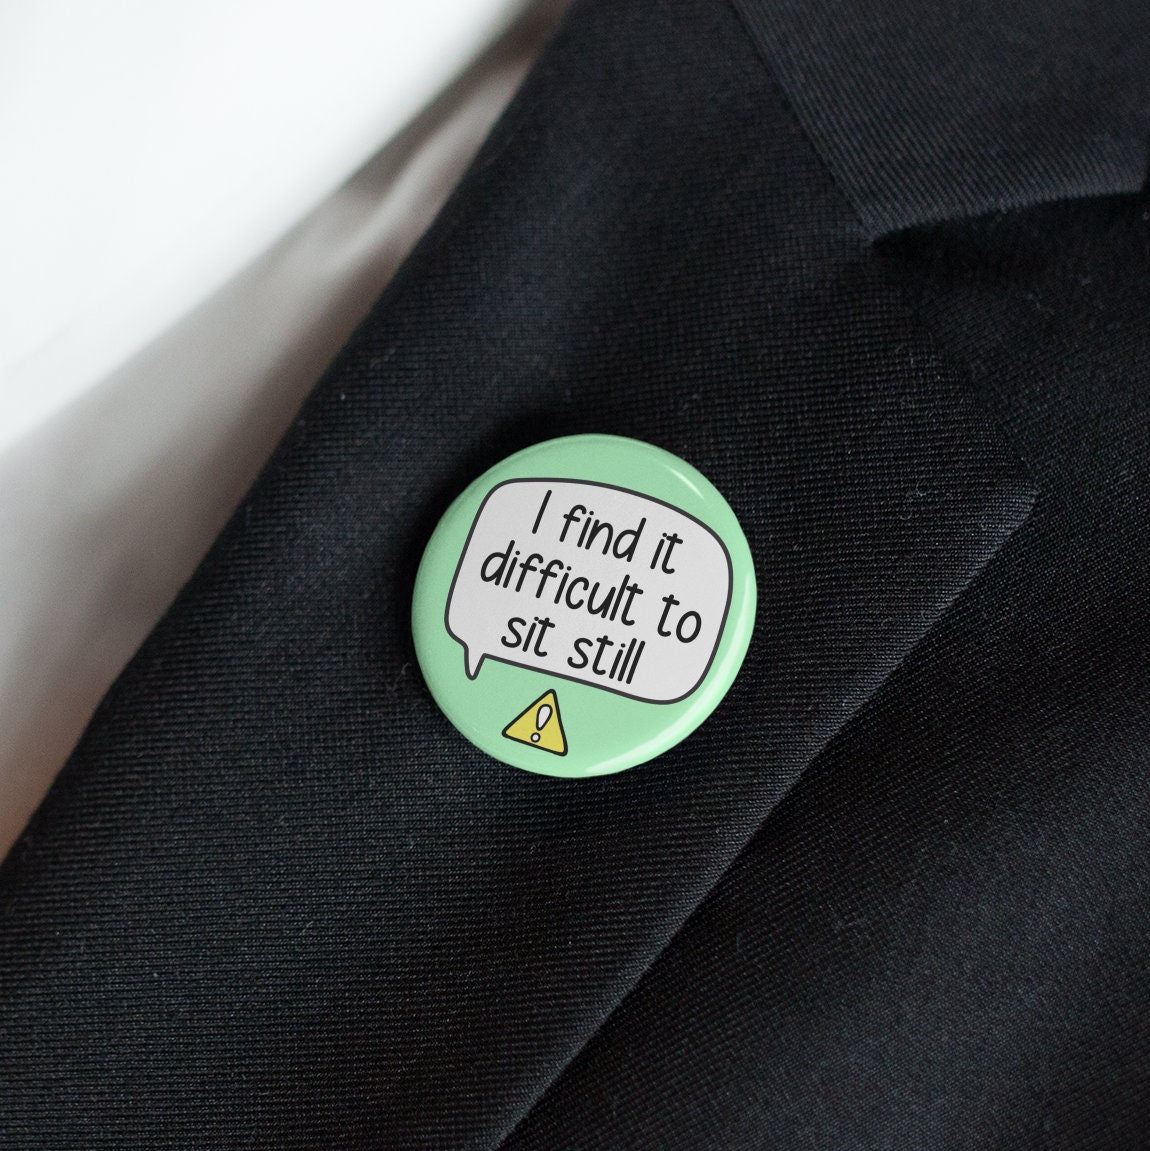 I find it difficult to sit still Badge Pin | ADHD Button Badge - Fidget Pin Badge - ADHD Awareness